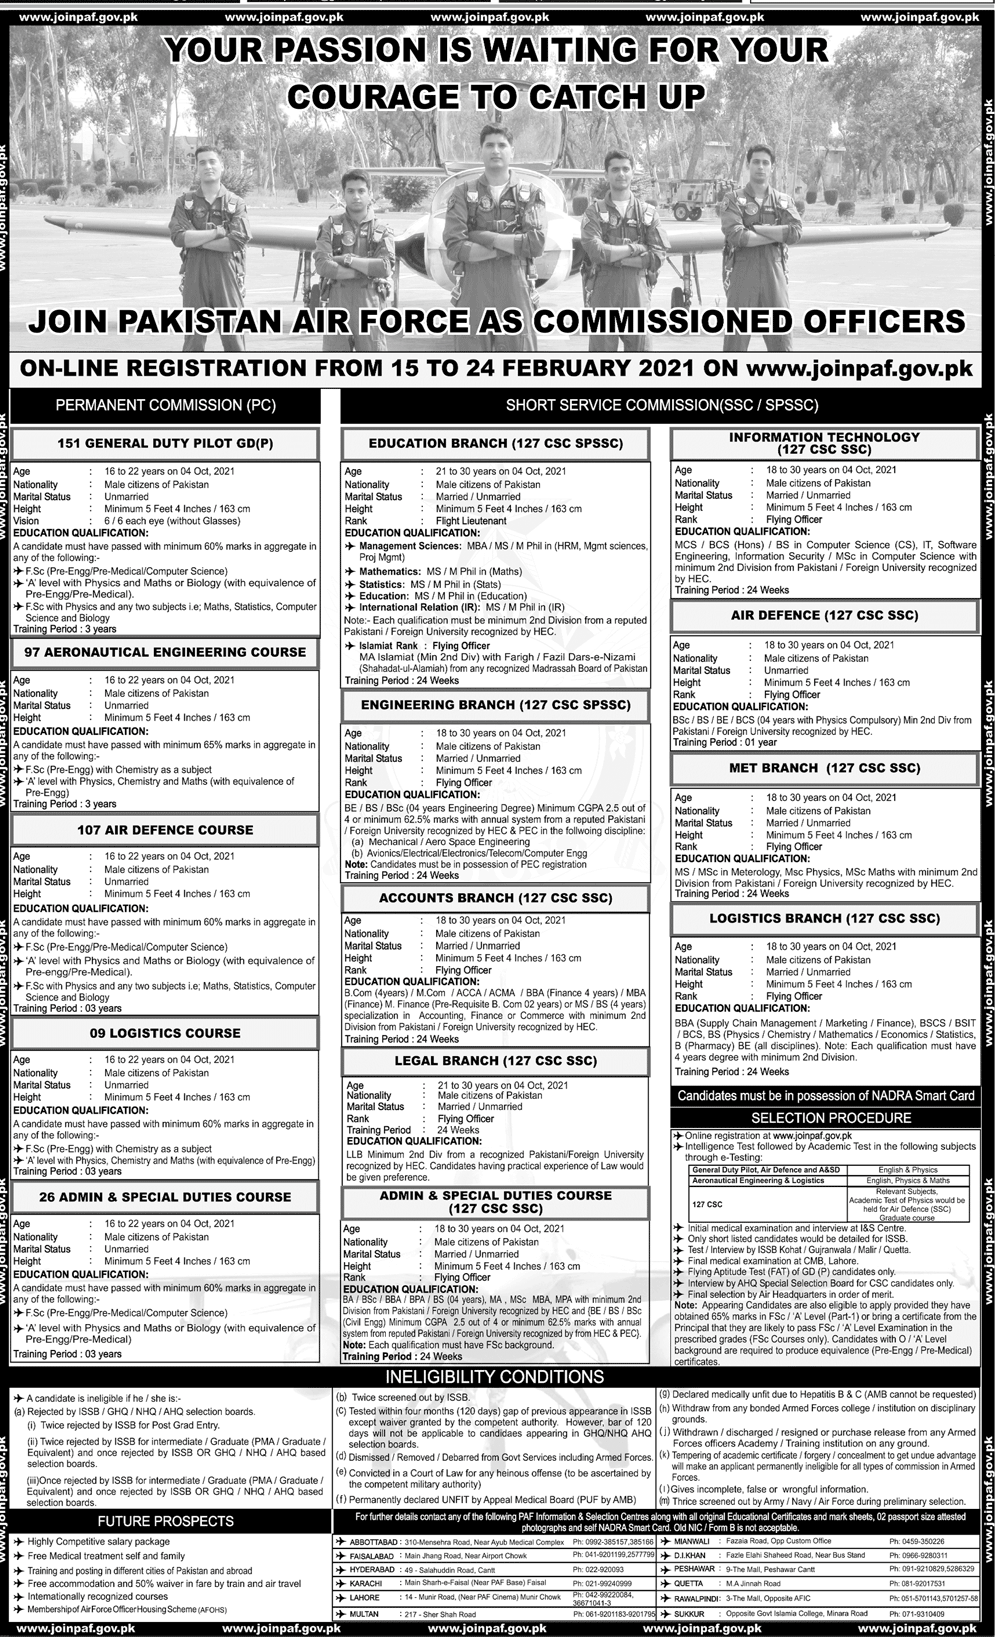 Join Pakistan Air Force as Commissioned Officer 2021